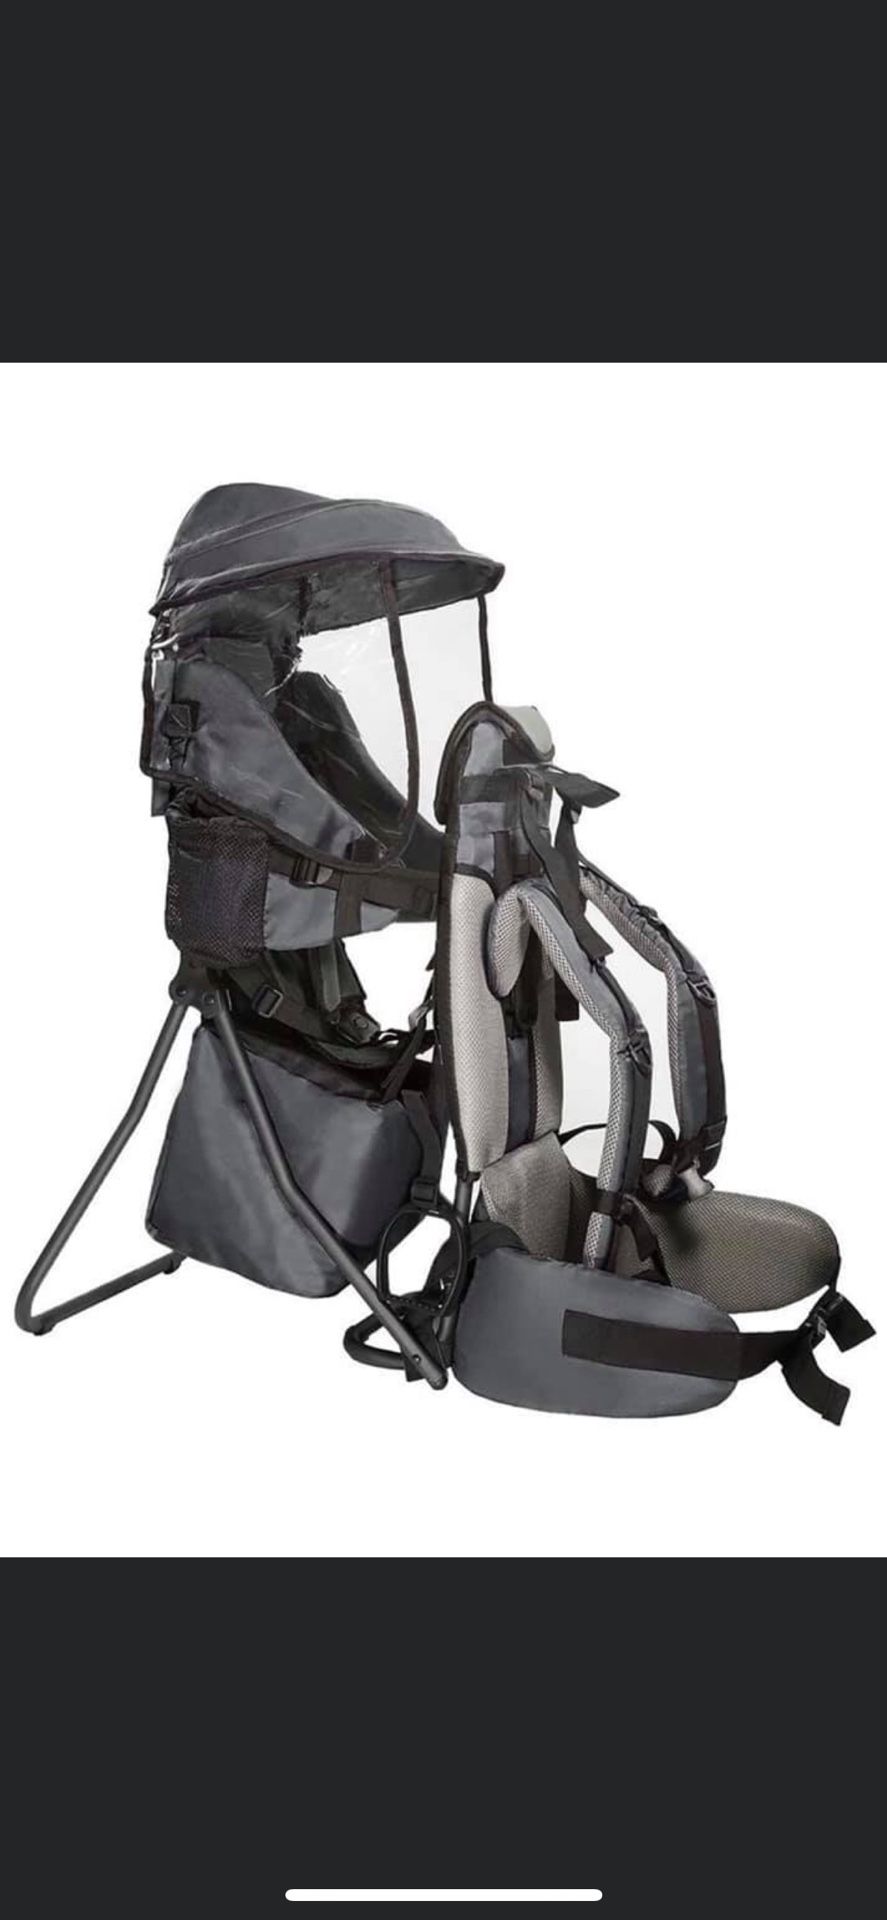 Clevr Premium Cross Country Baby Backpack Hiking Child Carrier with Stand